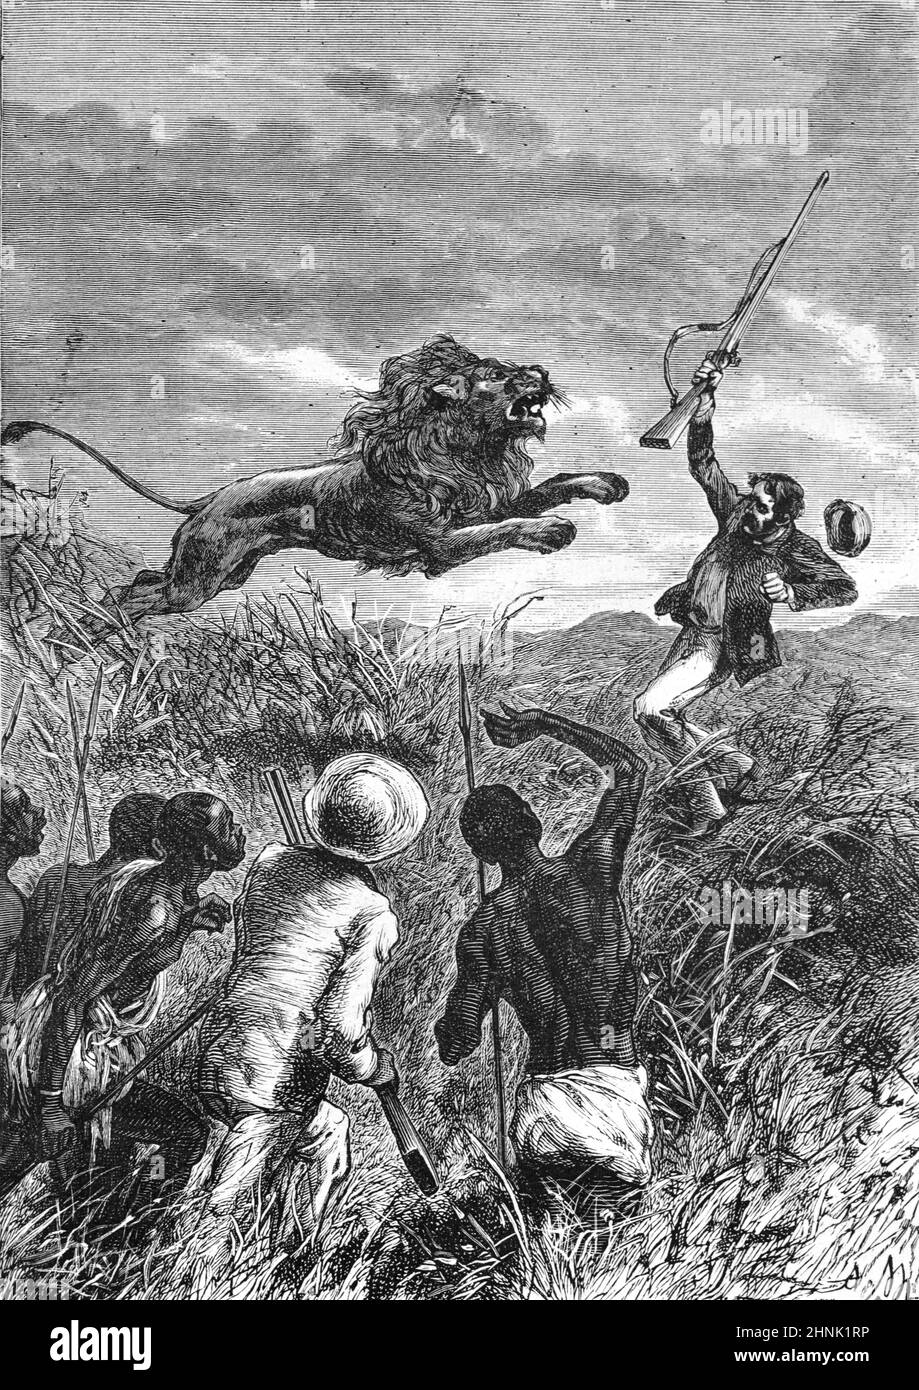 David Livingstone Attacked by Lion on 16 February 1844 in Mabotsa Botswana in Africa. His life was saved bu Mebalwe, an African deacon and fellow missionary. Vintage Illustration or Engraving 1883 (Castelli) Stock Photo